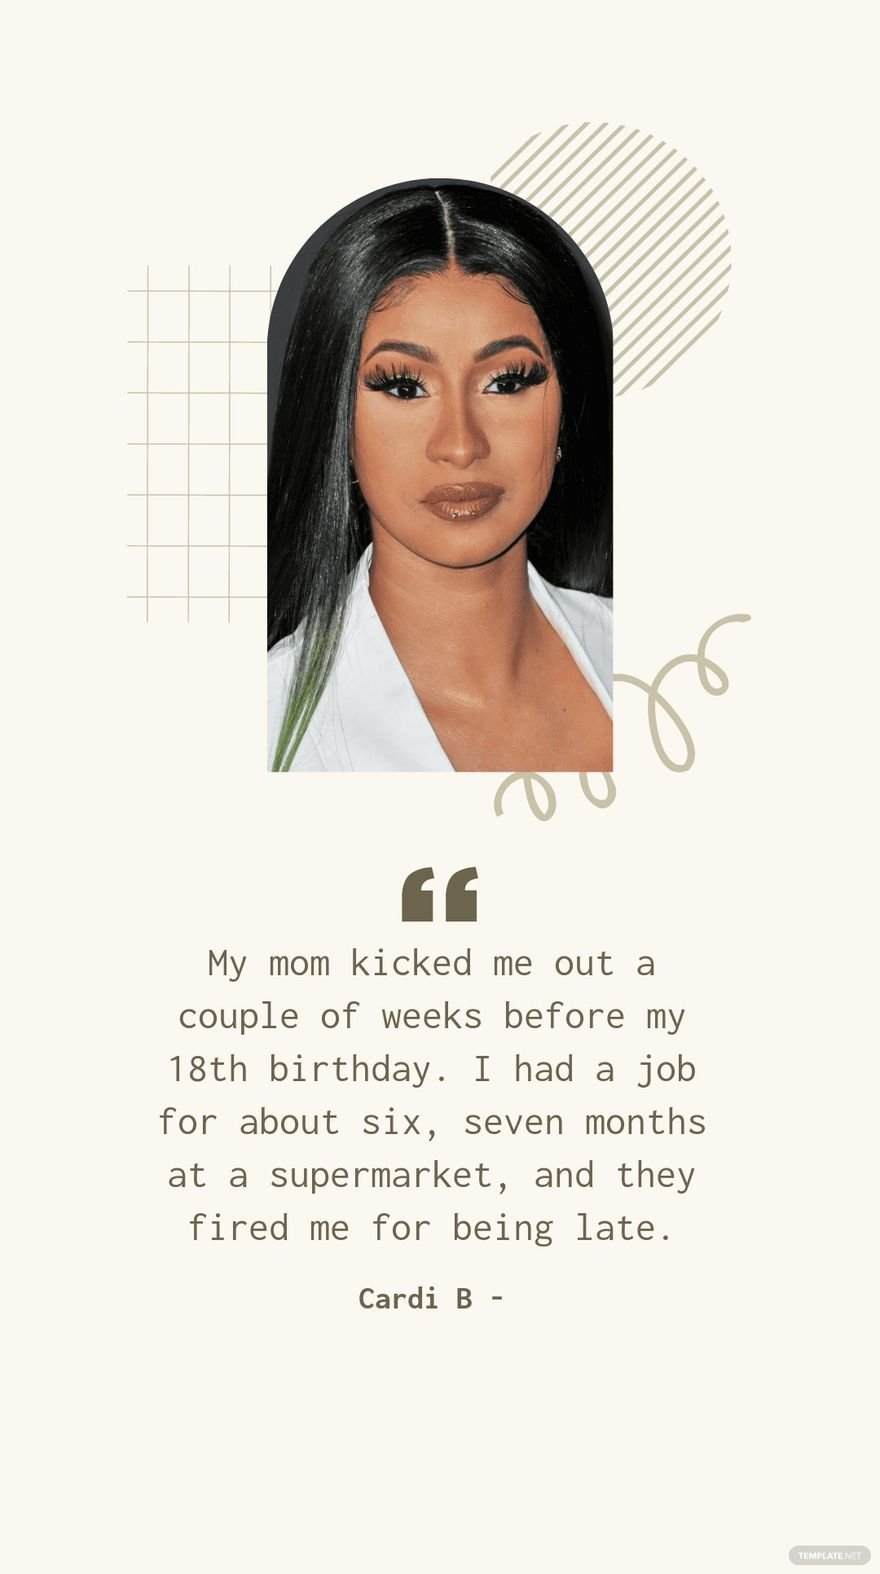 Free Cardi B - My mom kicked me out a couple of weeks before my 18th birthday. I had a job for about six, seven months at a supermarket, and they fired me for being late. in JPG